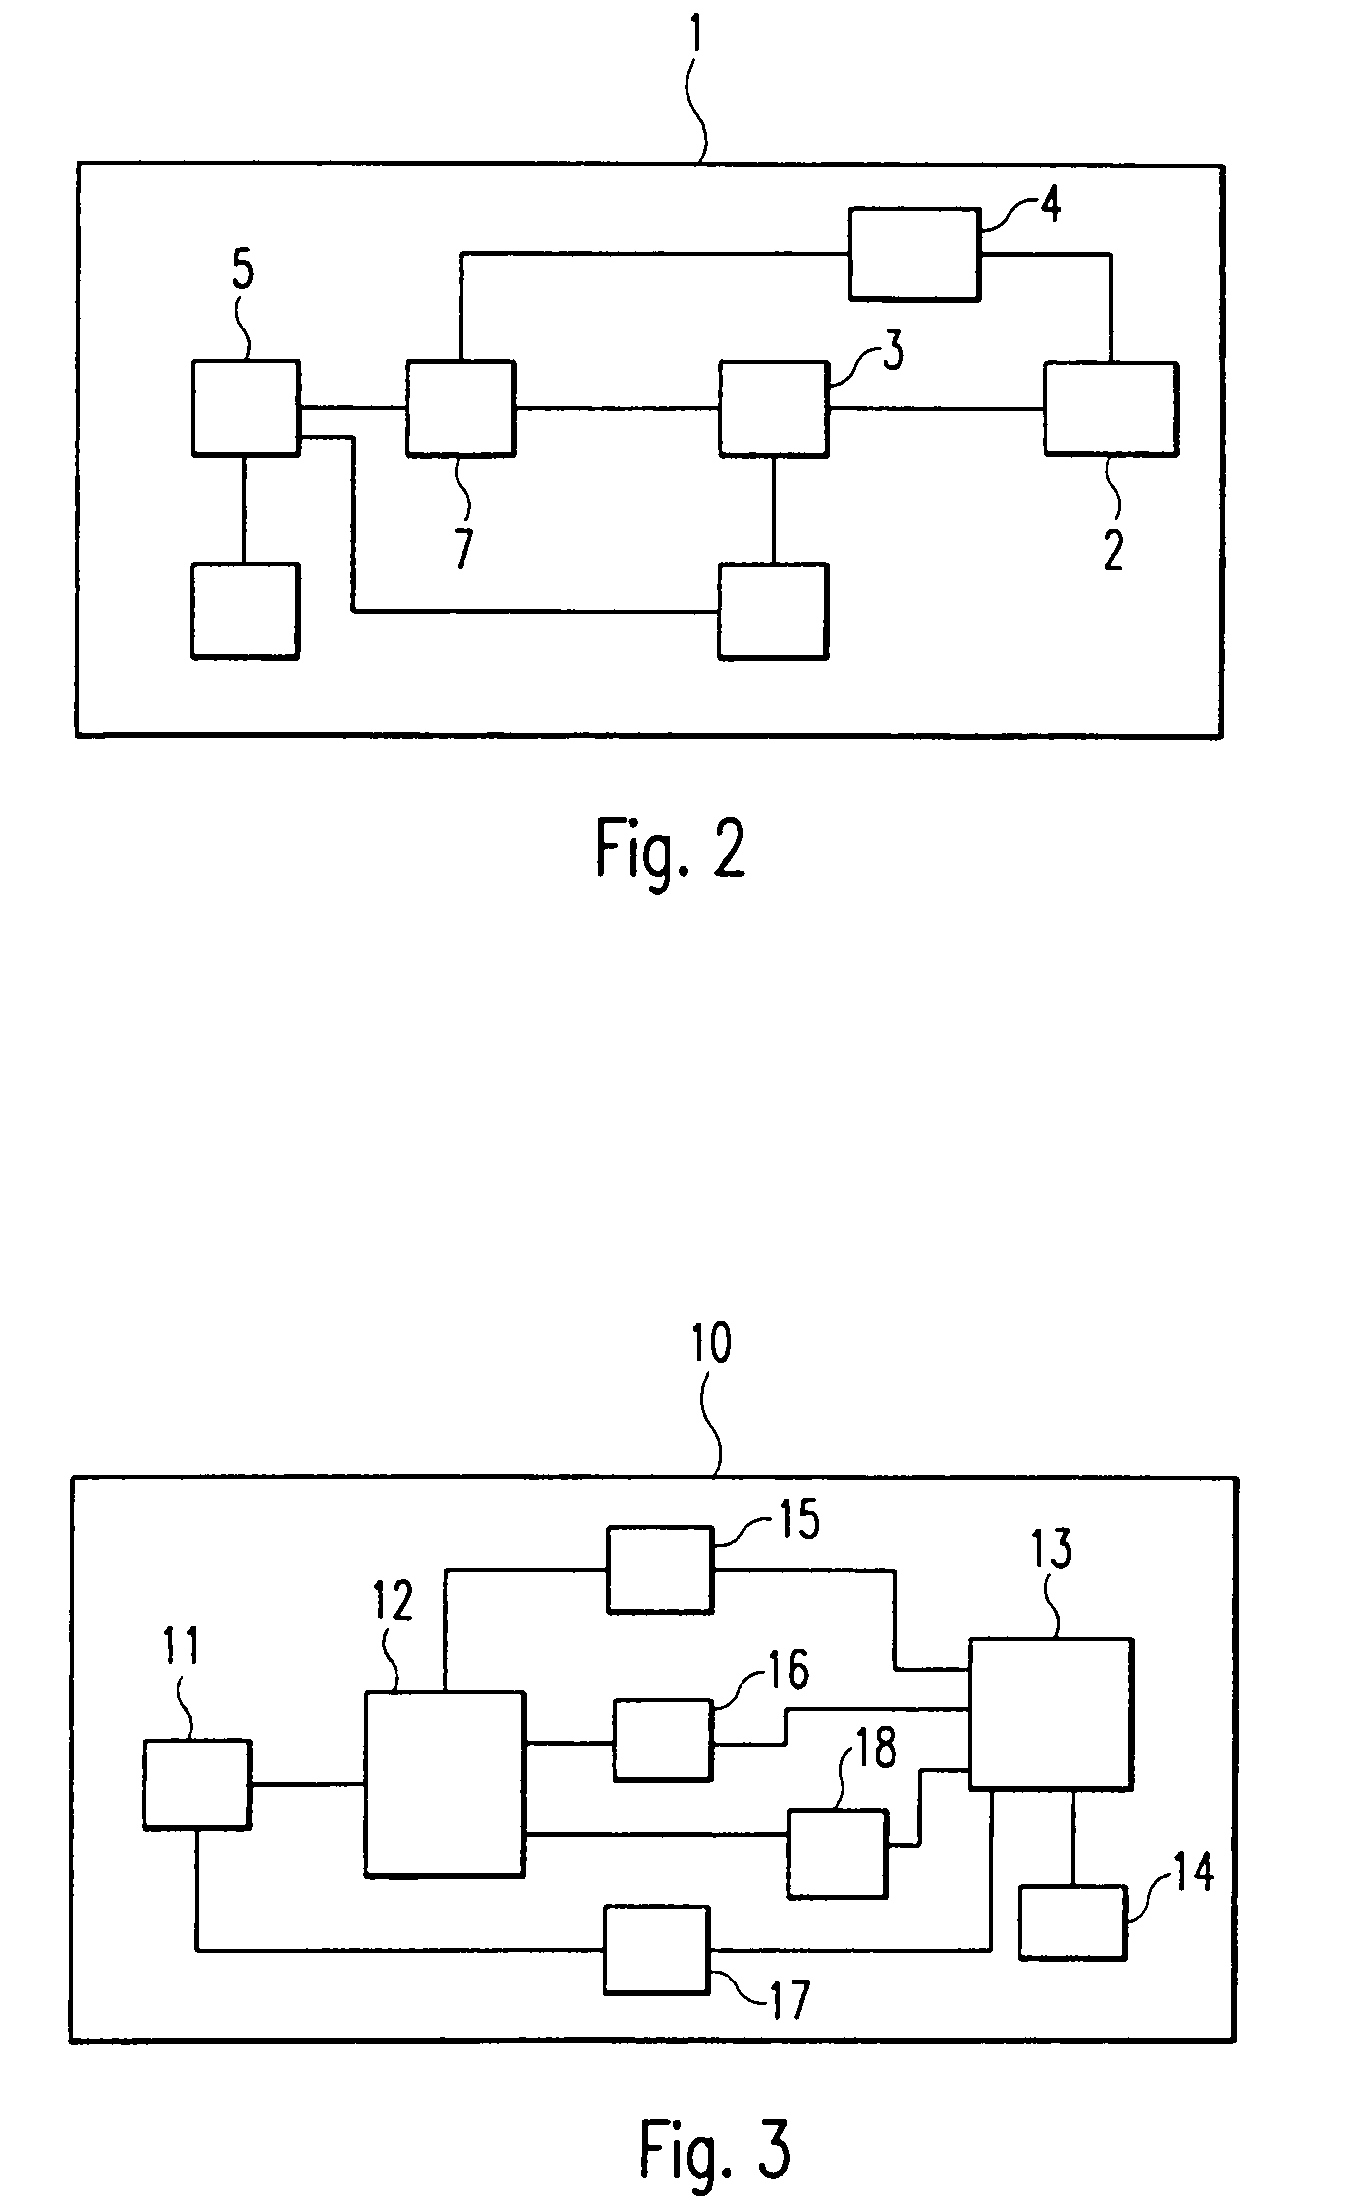 Transmitting device, receiving device and method for establishing a wireless communication link